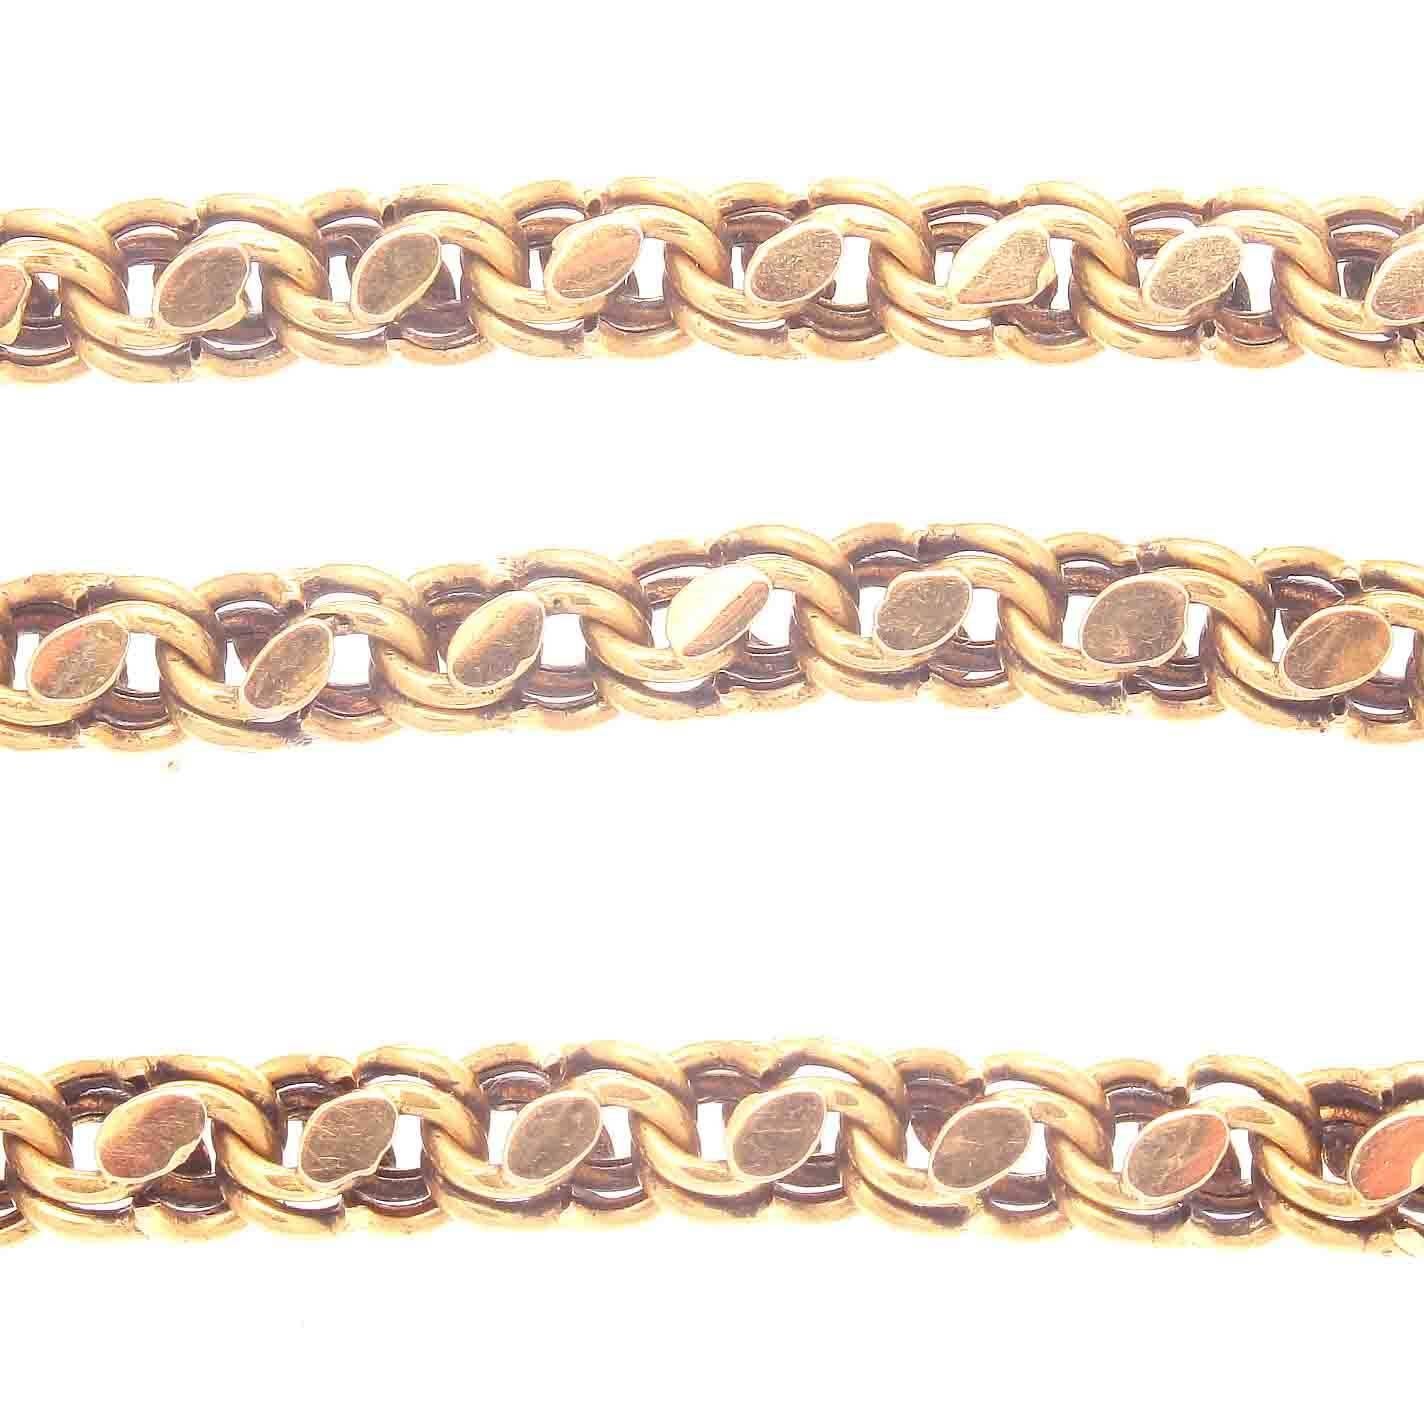 Classic design that allows the wearer flexibility in how it's worn. Long enough to quadruple wrap, triple wrap, double wrap or just wear as a long single chain. Constructed with intricate links of 18k gold interlocking together.  Stamped with French